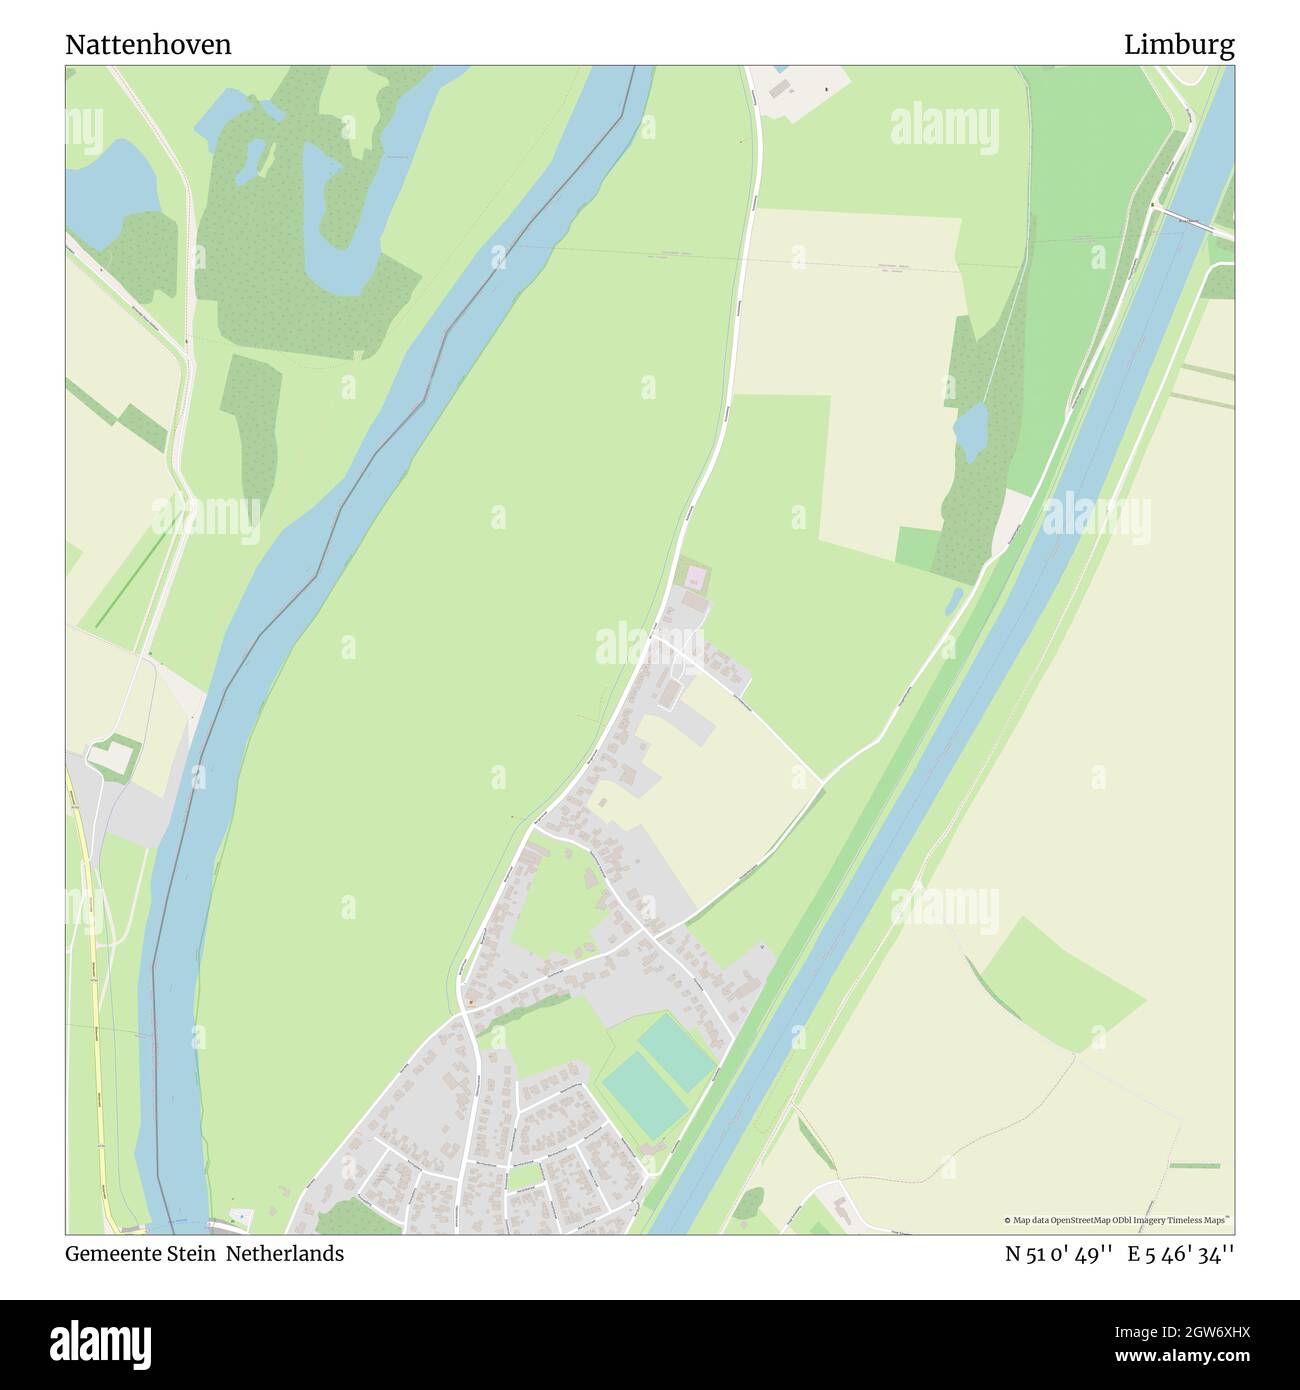 Nattenhoven, Gemeente Stein, Netherlands, Limburg, N 51 0' 49'', E 5 46' 34'', map, Timeless Map published in 2021. Travelers, explorers and adventurers like Florence Nightingale, David Livingstone, Ernest Shackleton, Lewis and Clark and Sherlock Holmes relied on maps to plan travels to the world's most remote corners, Timeless Maps is mapping most locations on the globe, showing the achievement of great dreams Stock Photo